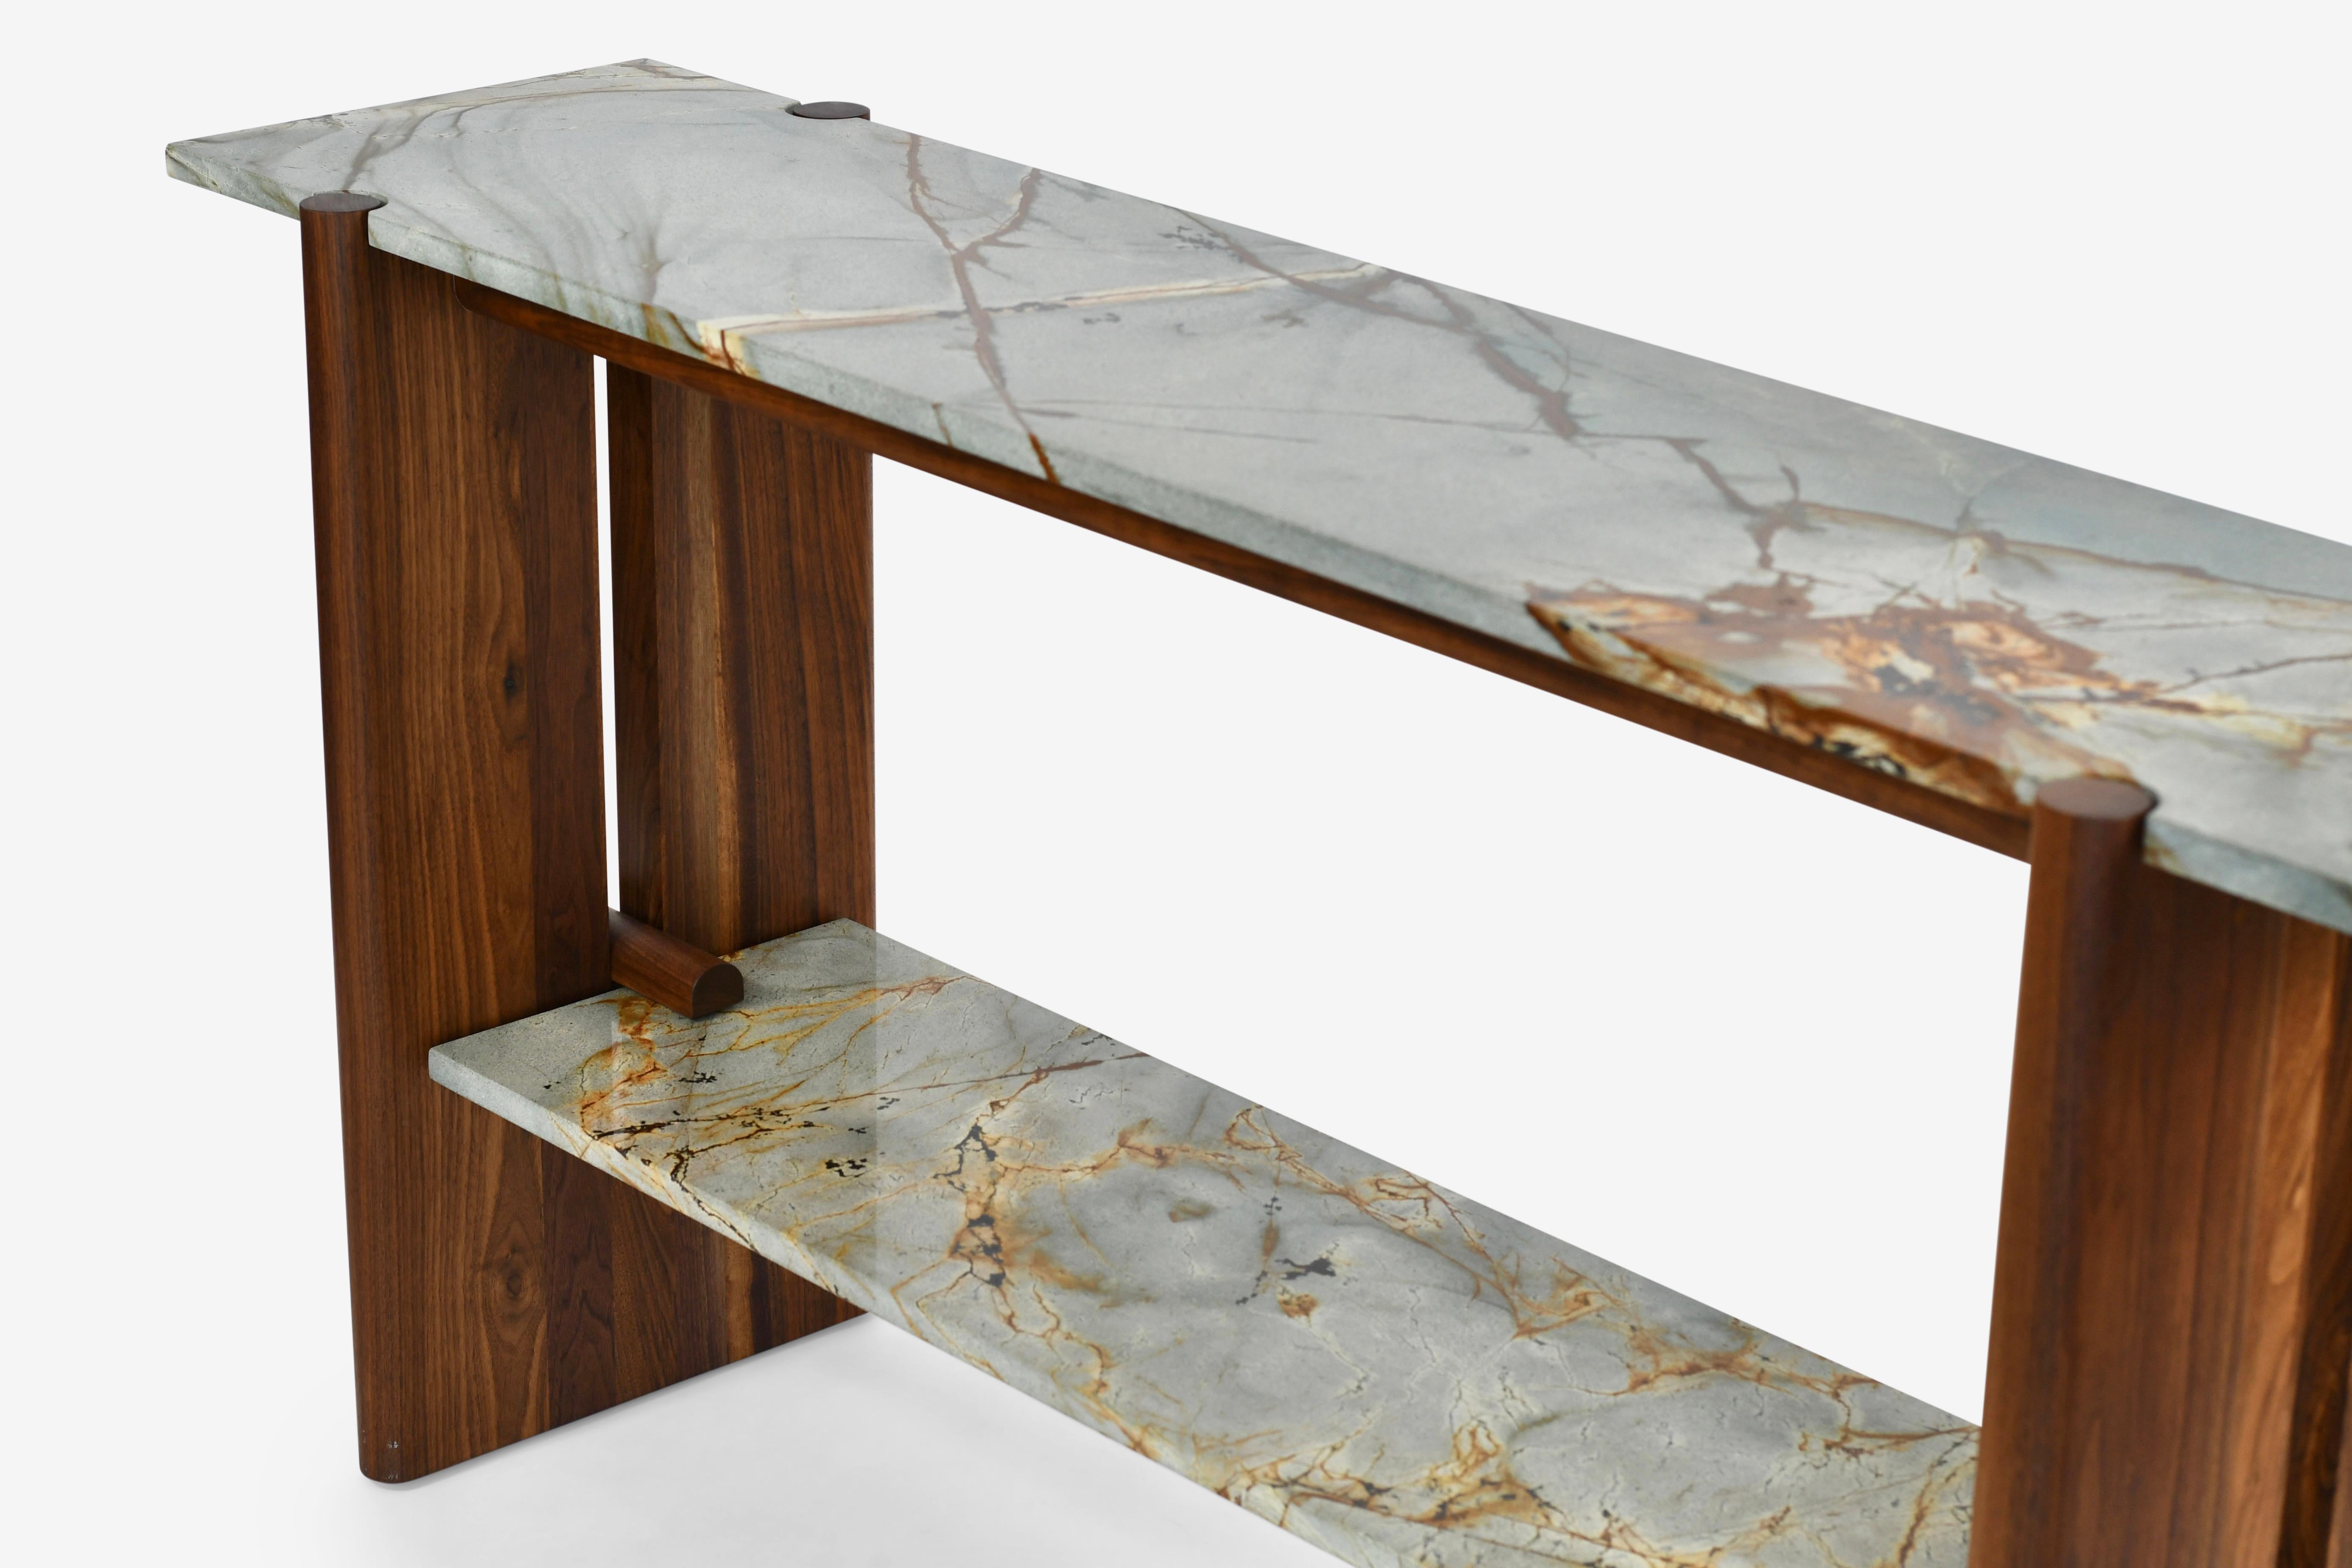 The Sulaco Console is defined by the interplay between shape and texture; the smooth rounded framework both compliment and contrast the Blue Mare Quartzite. The lower shelf is fully removable providing an extra layer of versatility and